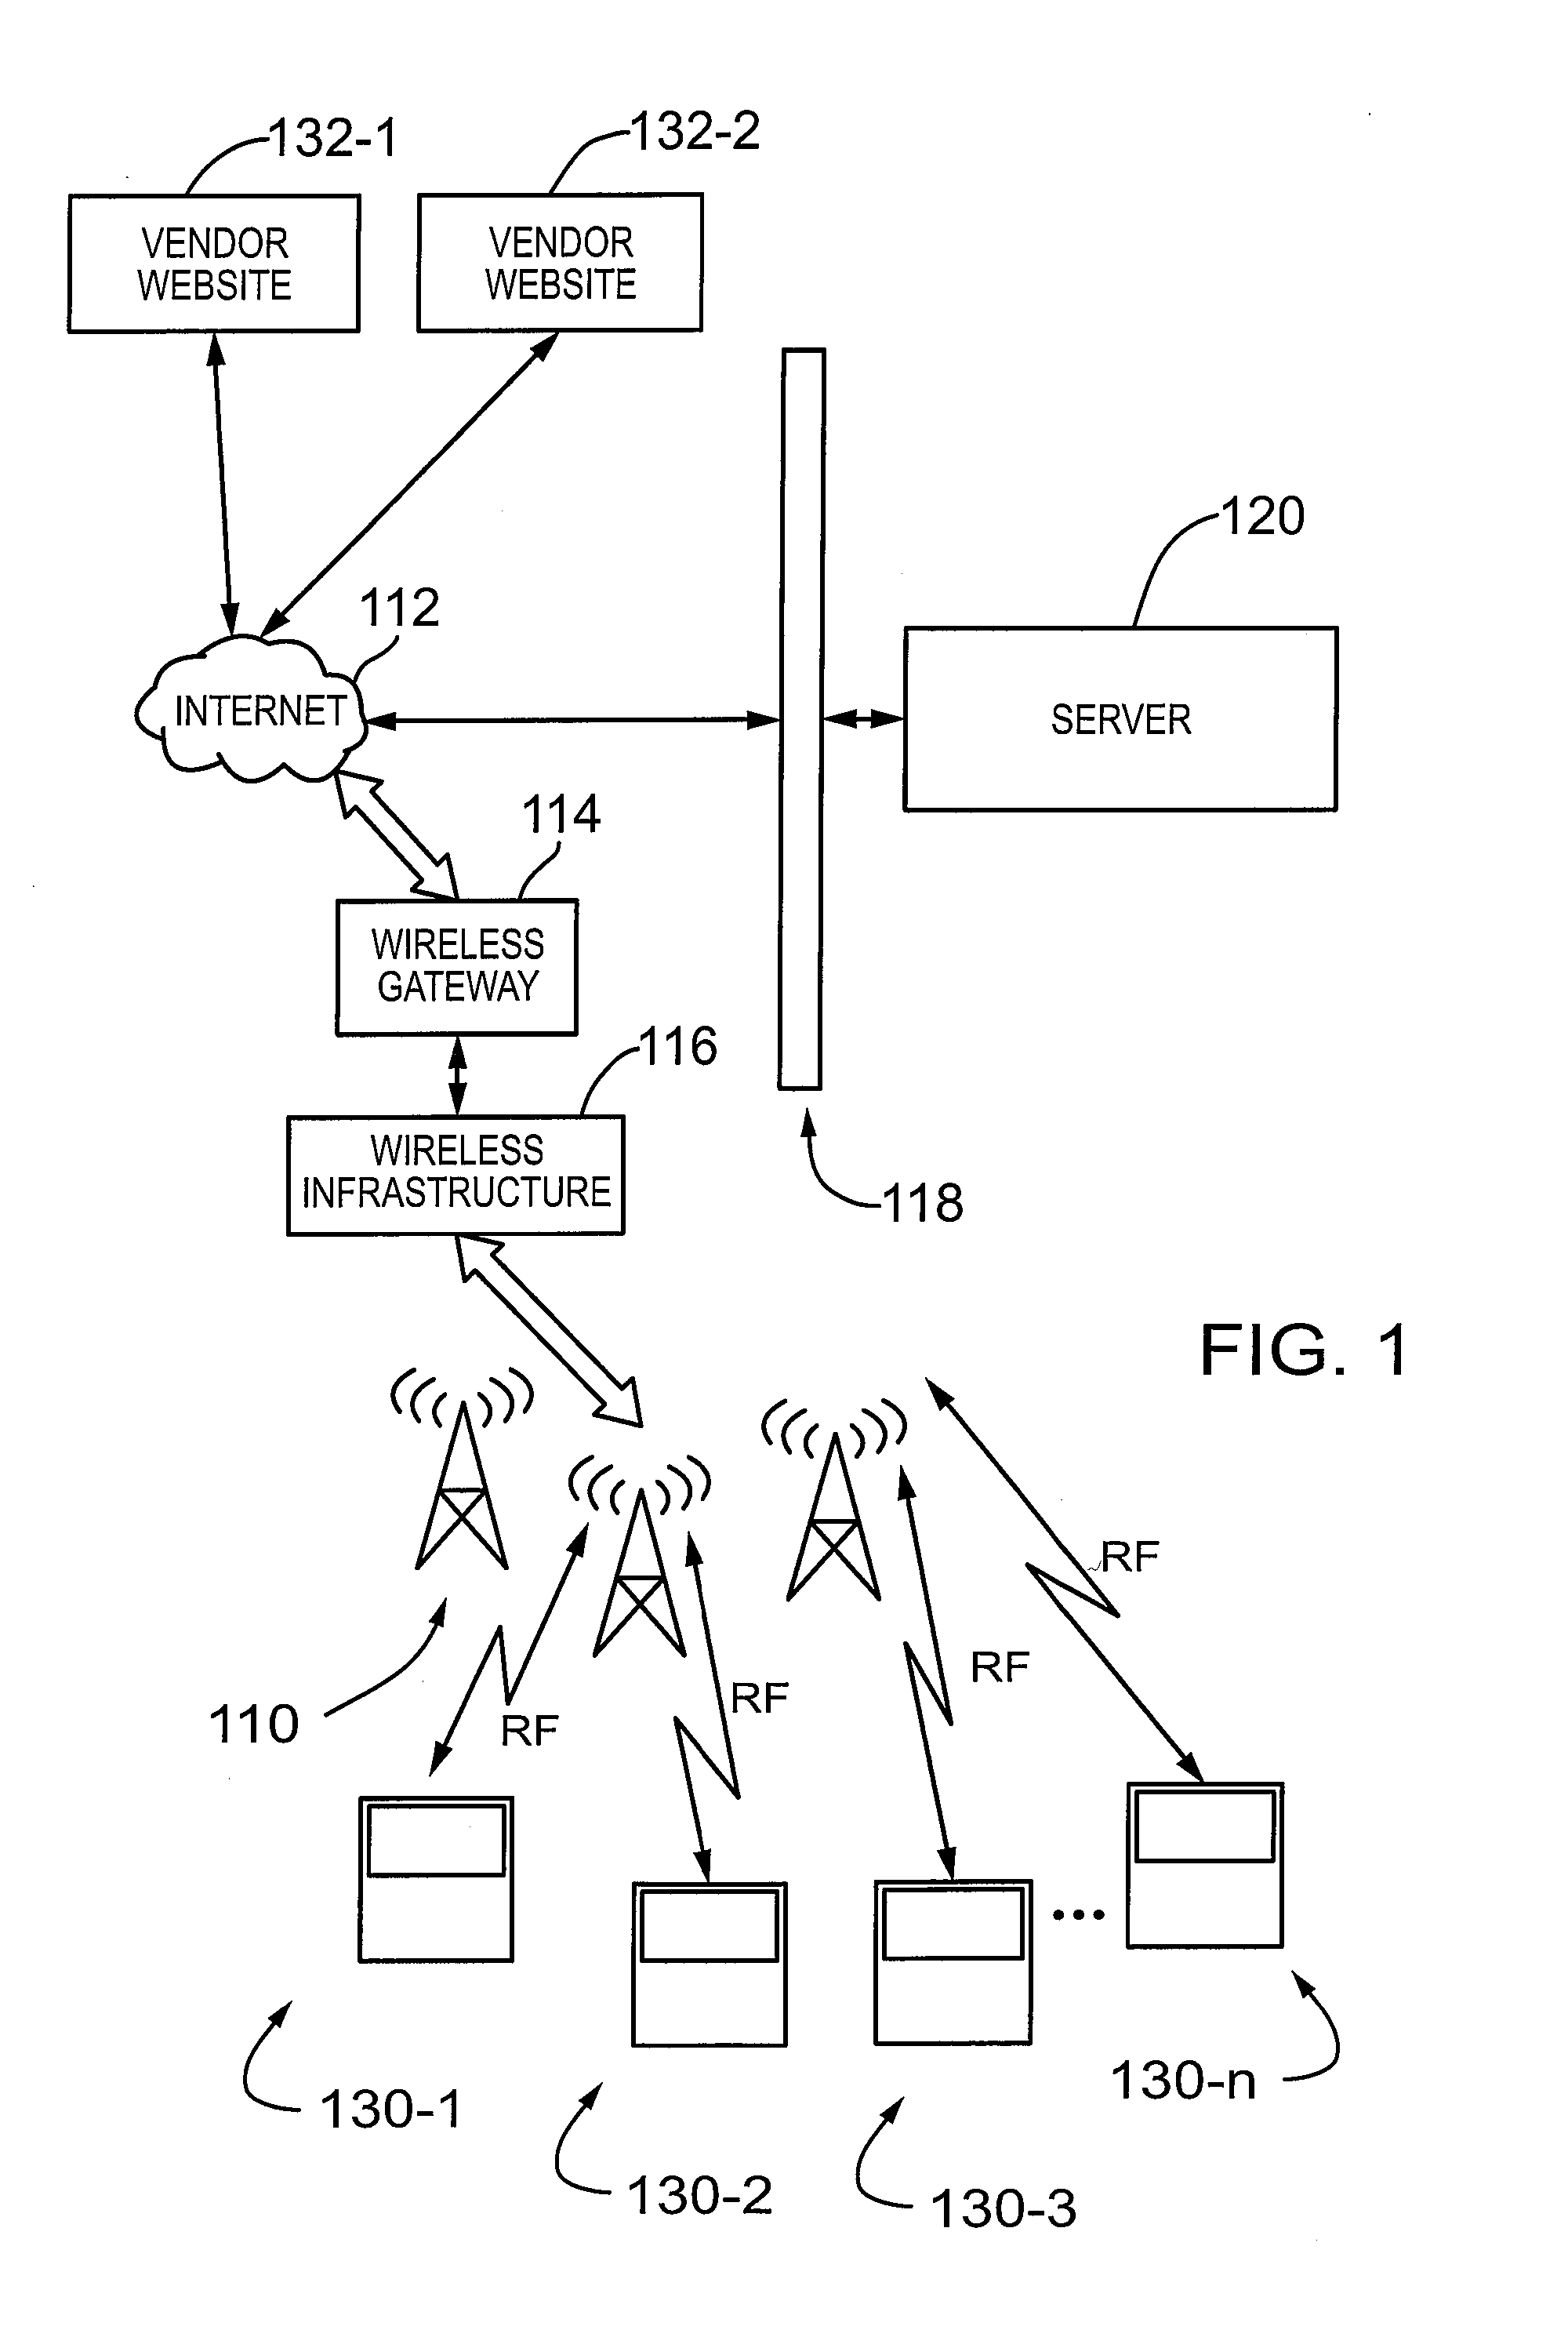 Method and apparatus for checkout transition in an e-commerce application